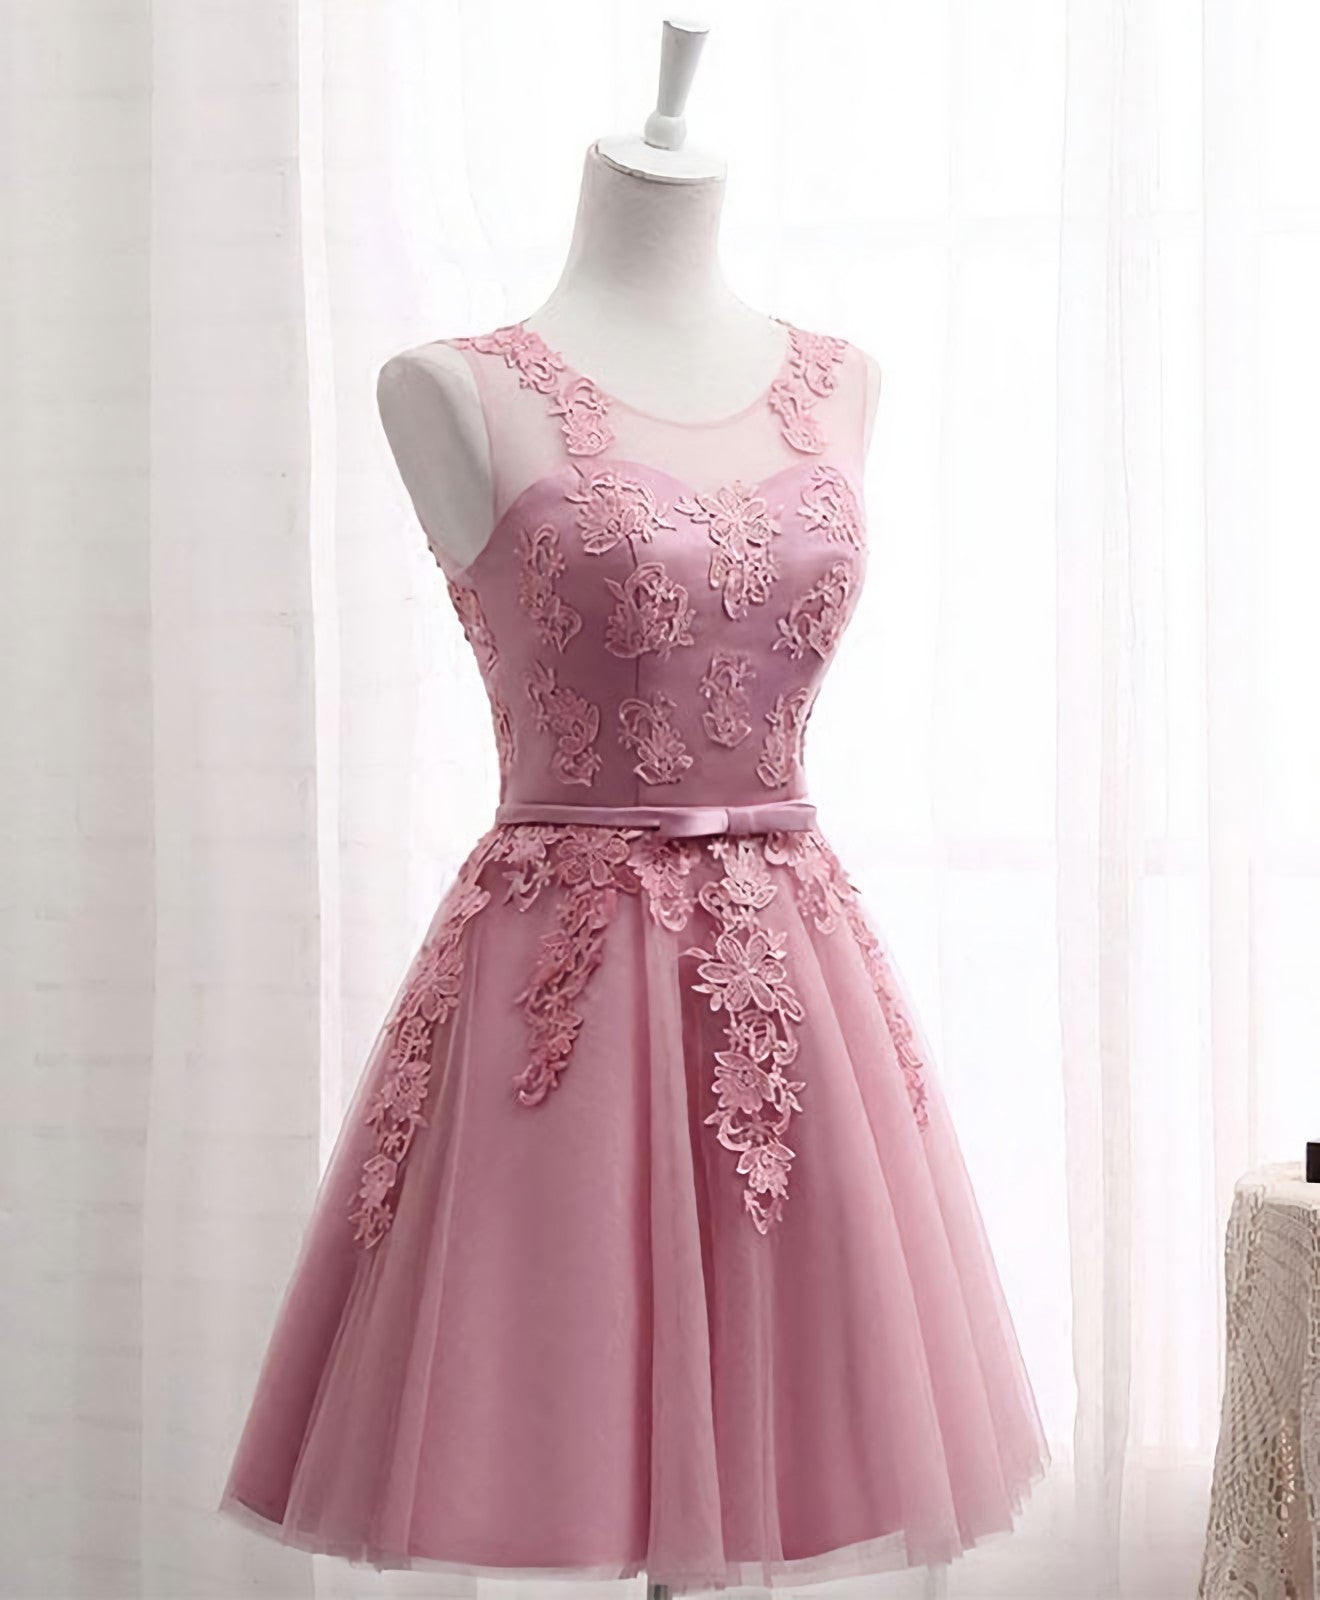 Party Dress In Store, Pink Round Neck Lace Tulle Prom Dress, Lace Evening Dresses